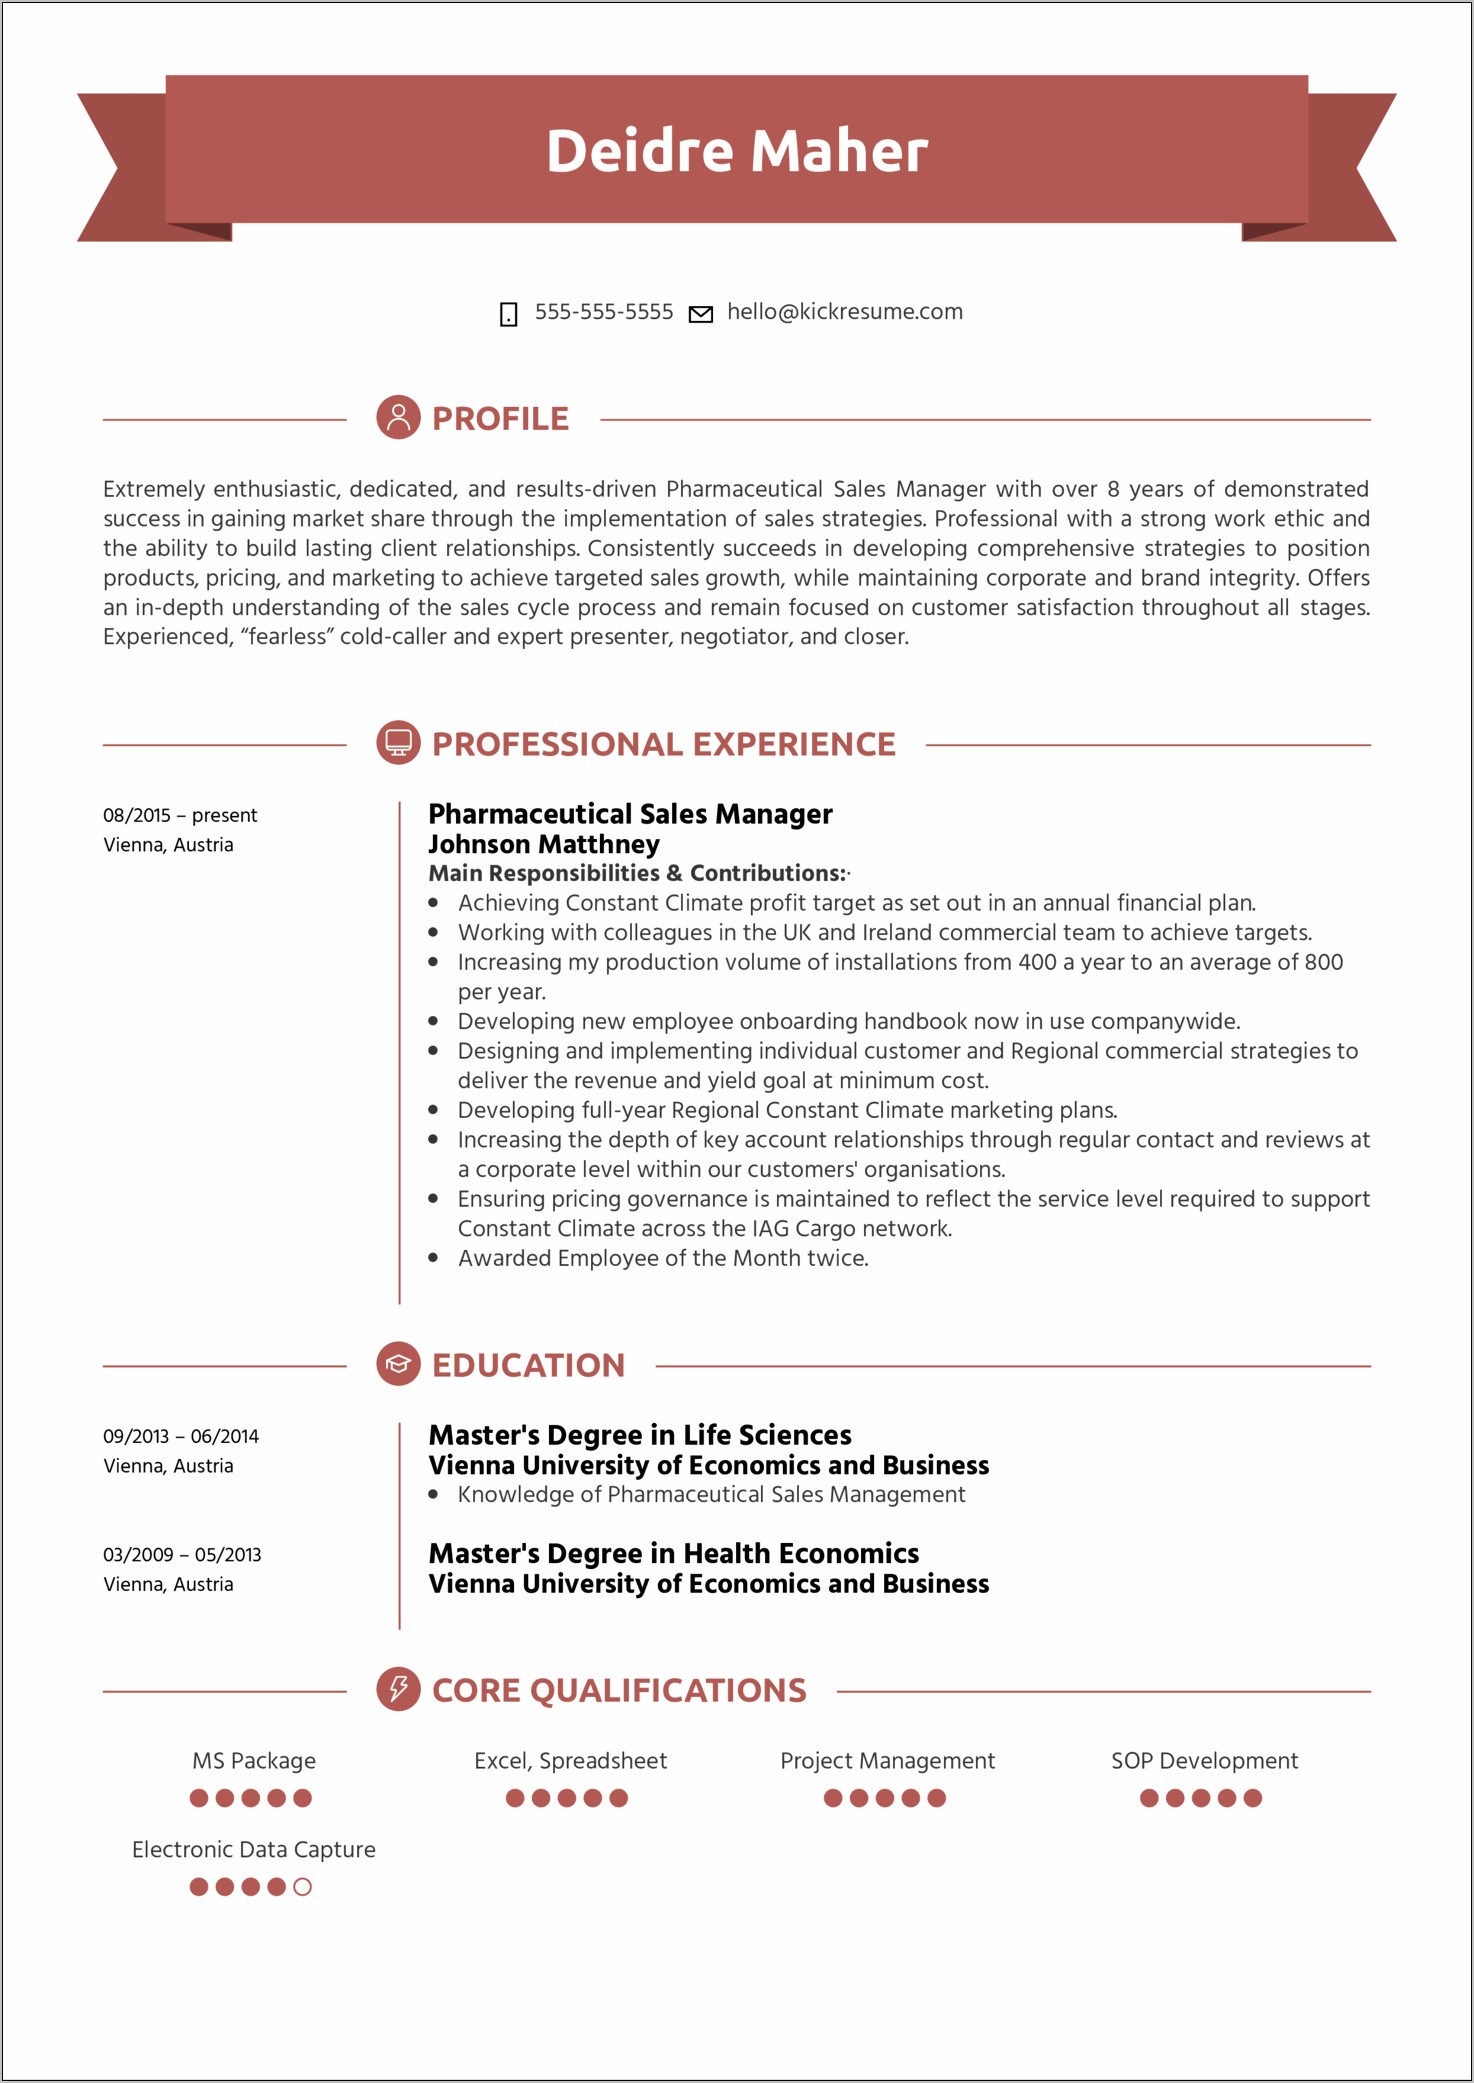 District Sales Manager Resume Summary